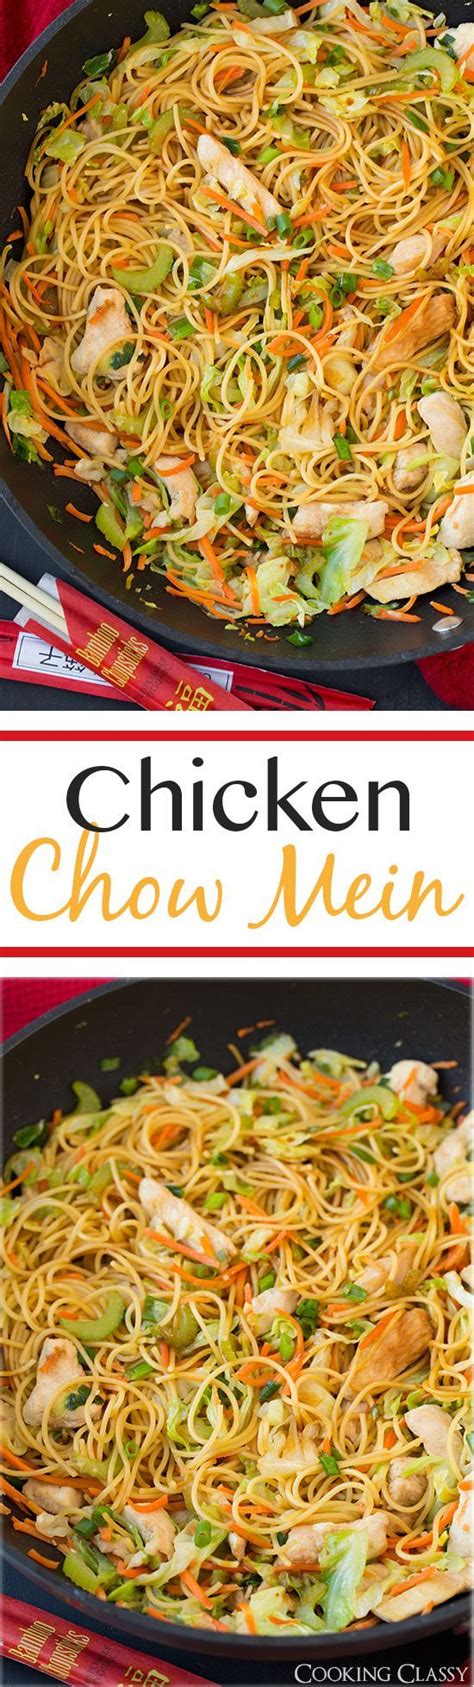 Chicken Chow Mein Cooking Classy Recipes Food Cooking